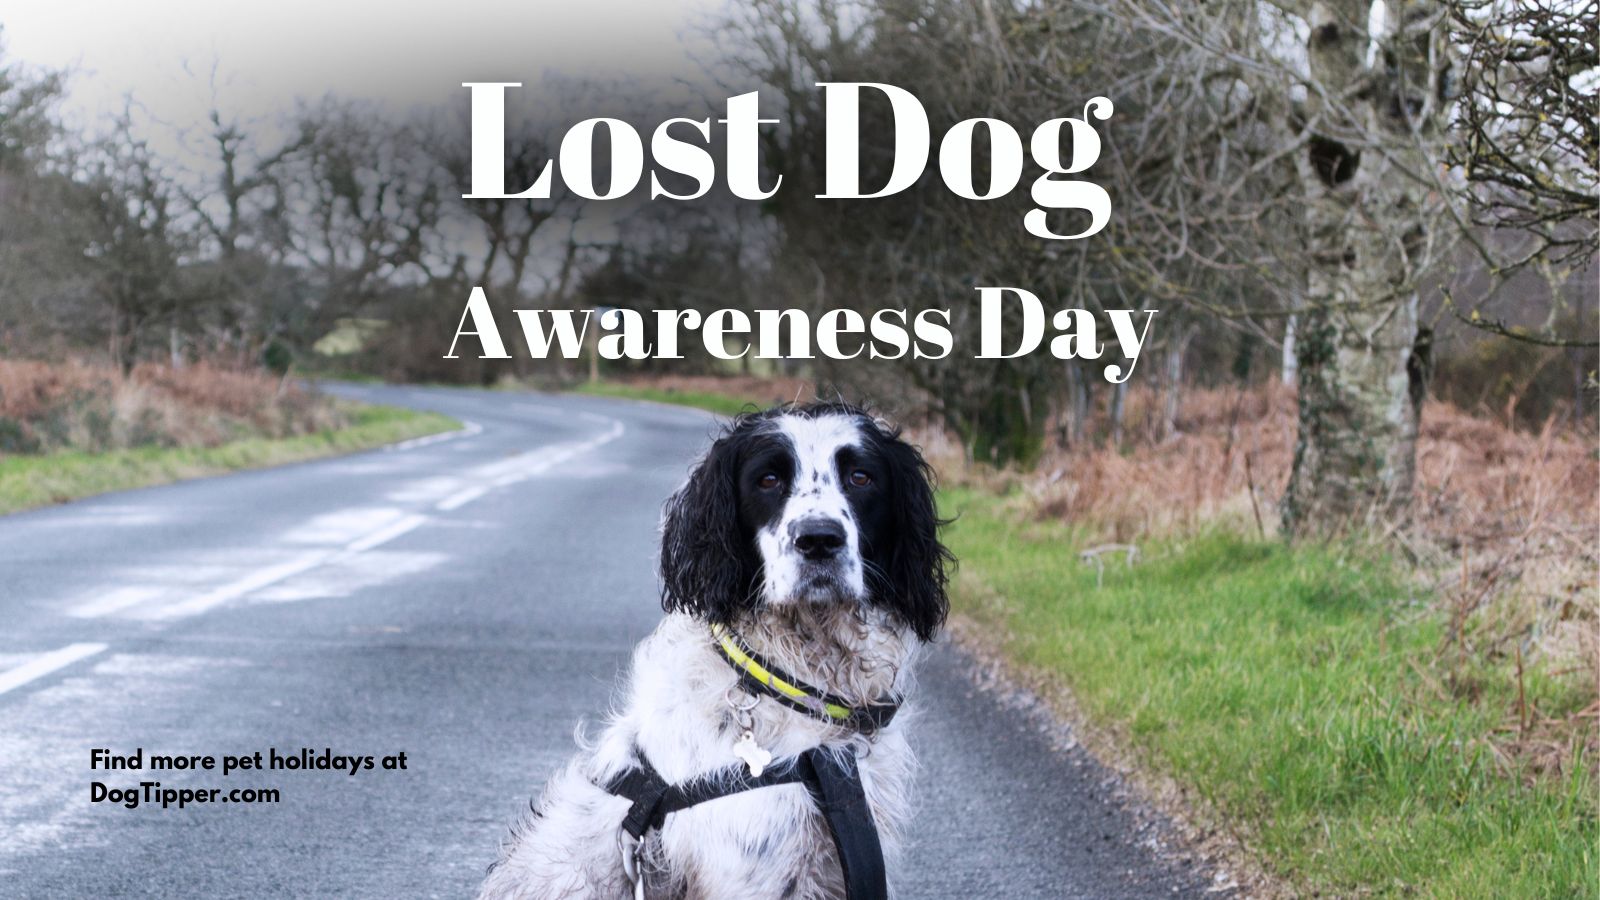 Lost Dog Awareness Day